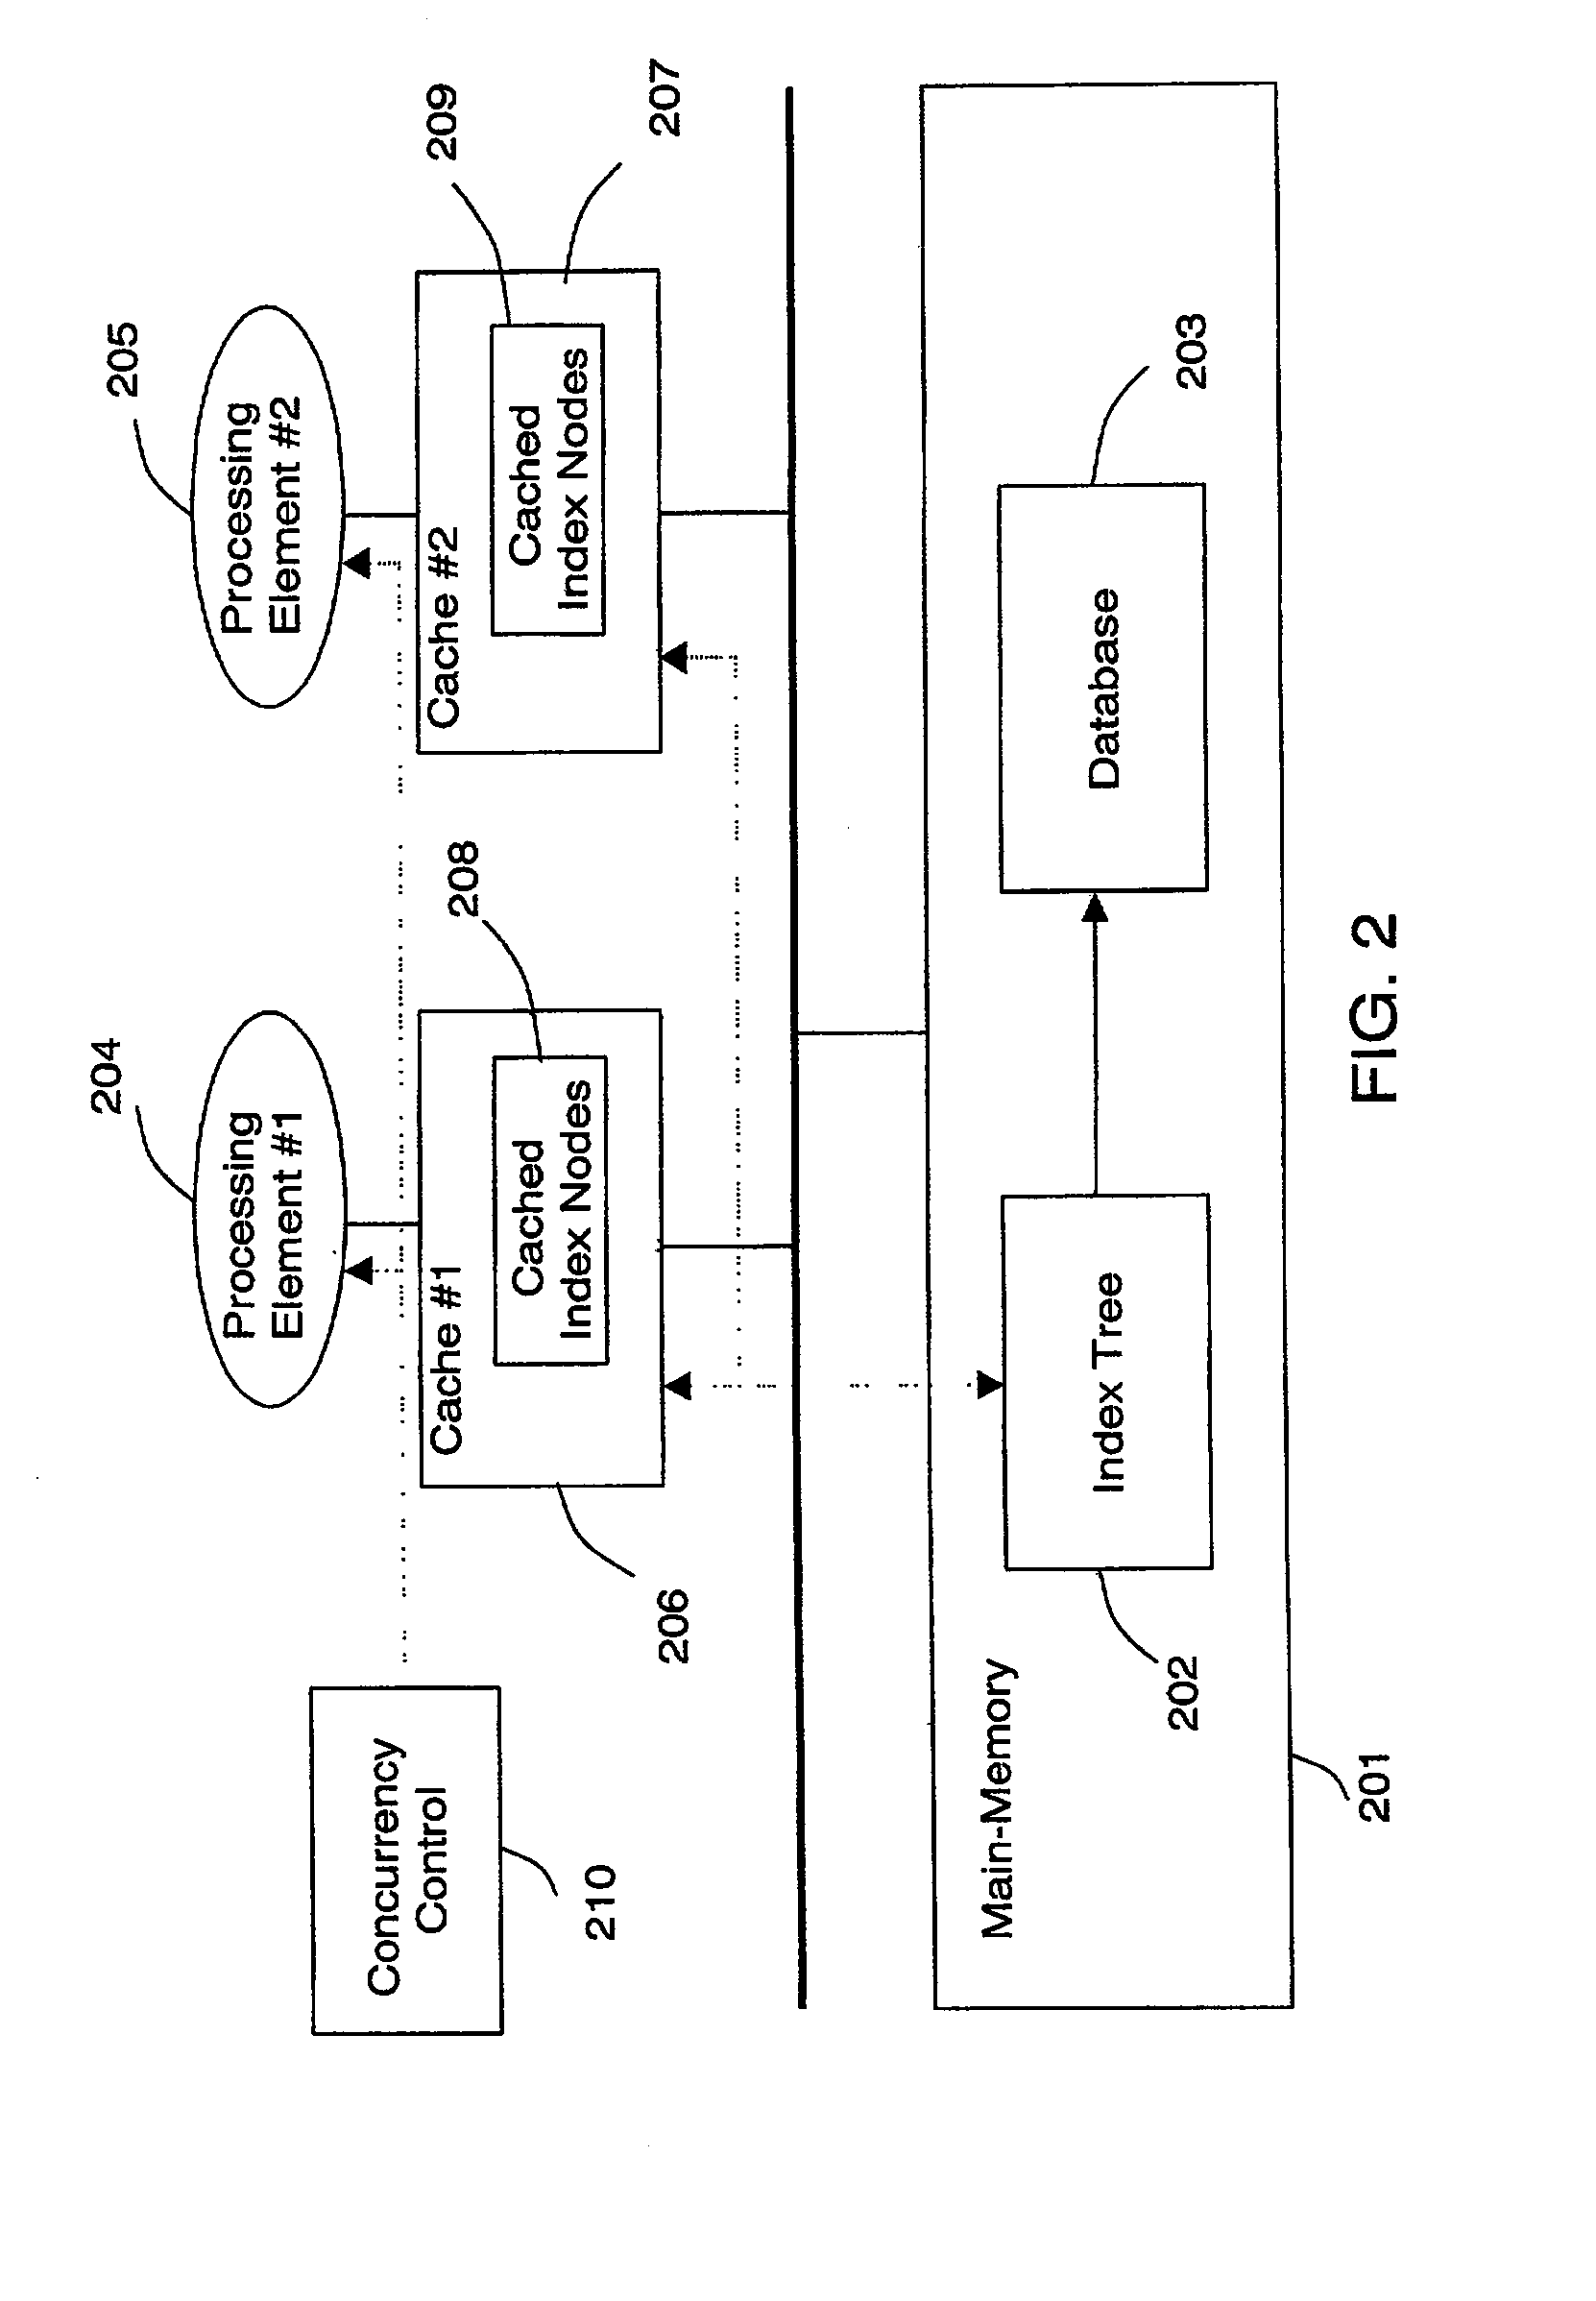 Cache-conscious concurrency control scheme for database systems